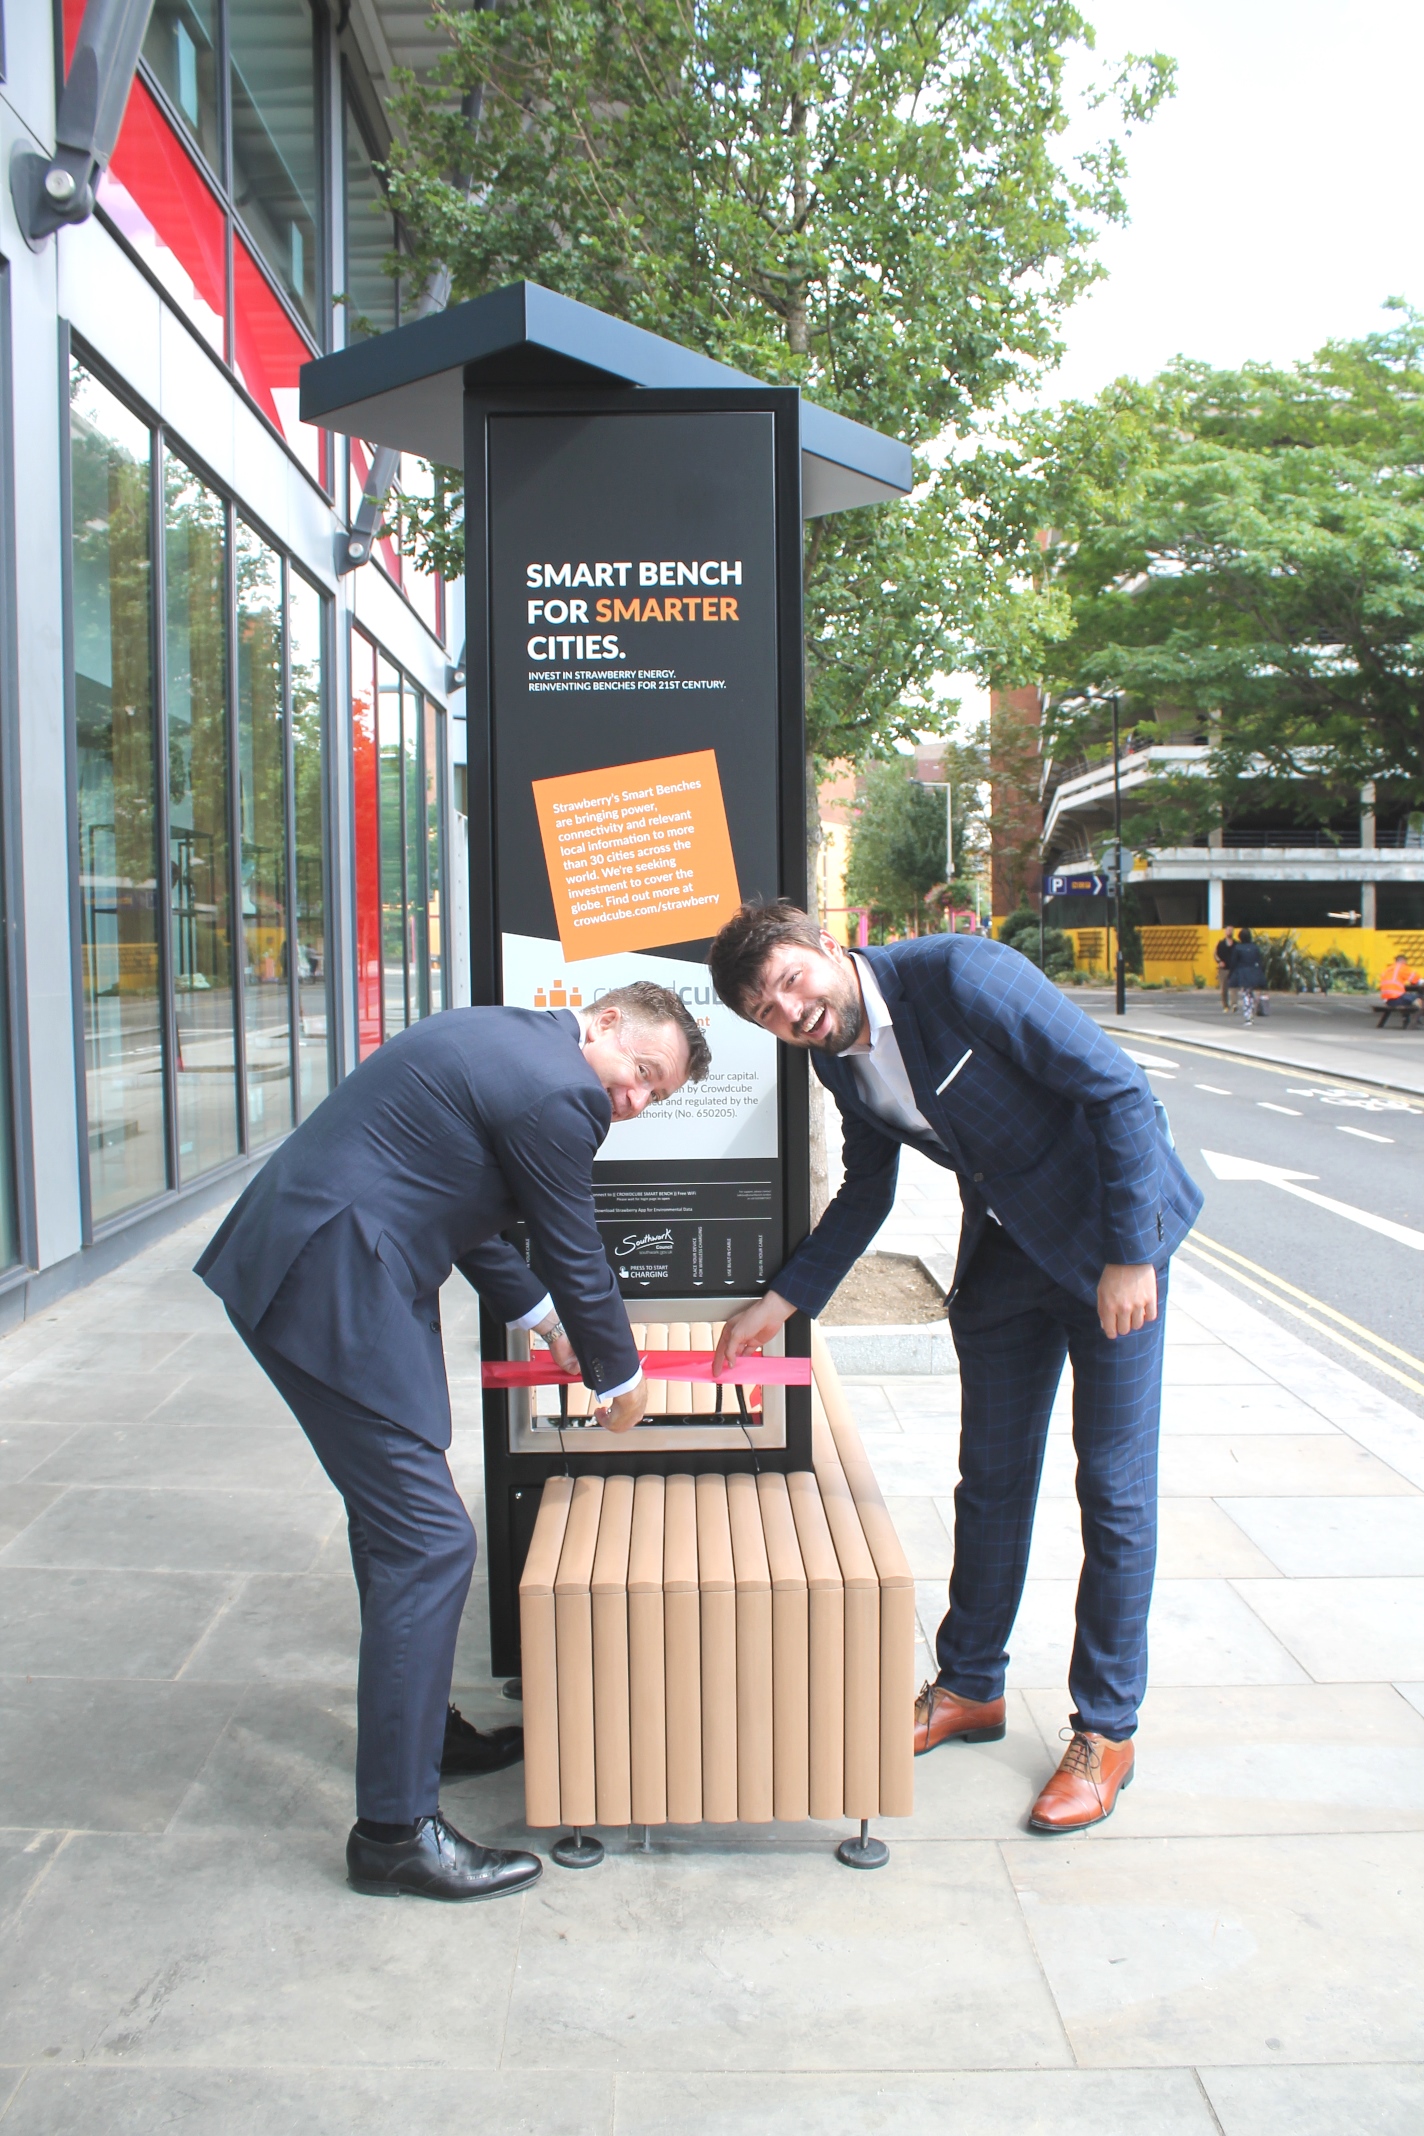 More solar-powered ‘smart benches’ appear on SE1 streets